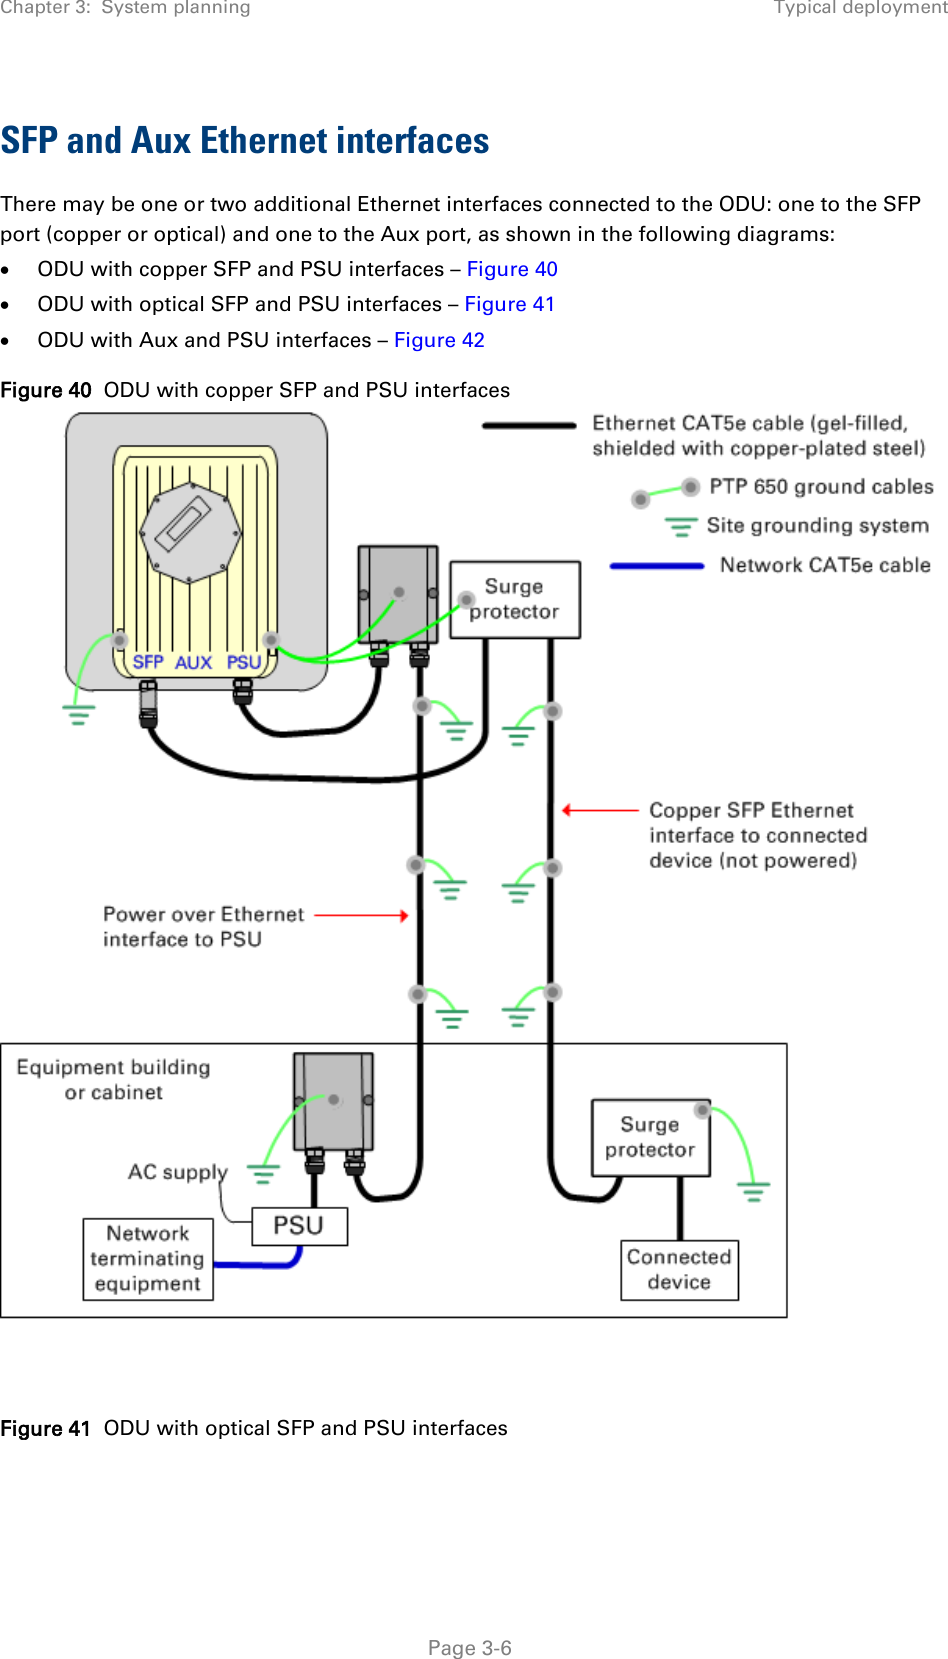 Chapter 3:  System planning Typical deployment  SFP and Aux Ethernet interfaces There may be one or two additional Ethernet interfaces connected to the ODU: one to the SFP port (copper or optical) and one to the Aux port, as shown in the following diagrams: • ODU with copper SFP and PSU interfaces – Figure 40 • ODU with optical SFP and PSU interfaces – Figure 41 • ODU with Aux and PSU interfaces – Figure 42 Figure 40  ODU with copper SFP and PSU interfaces   Figure 41  ODU with optical SFP and PSU interfaces   Page 3-6 